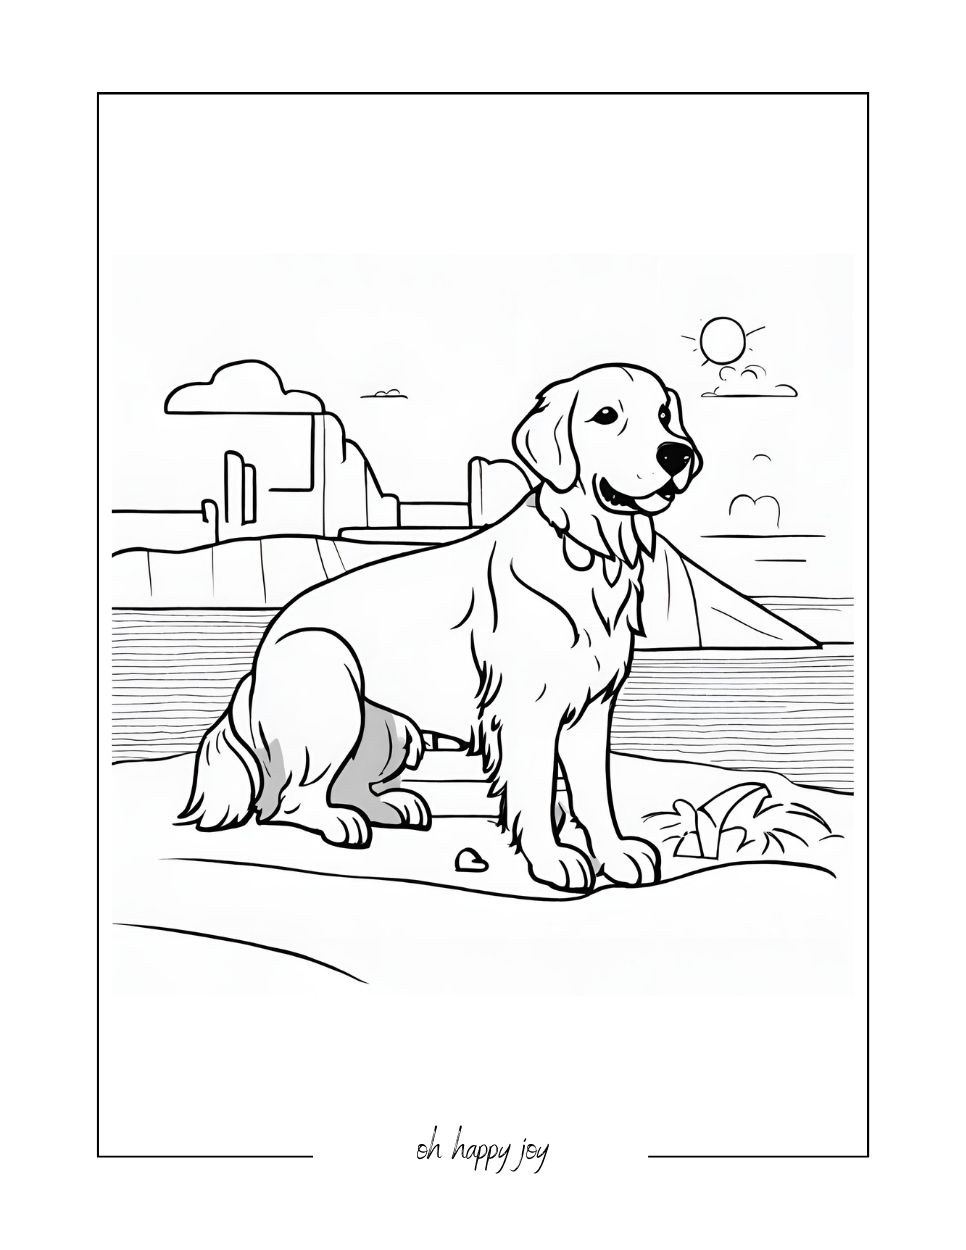 golden retriever vacation coloring page